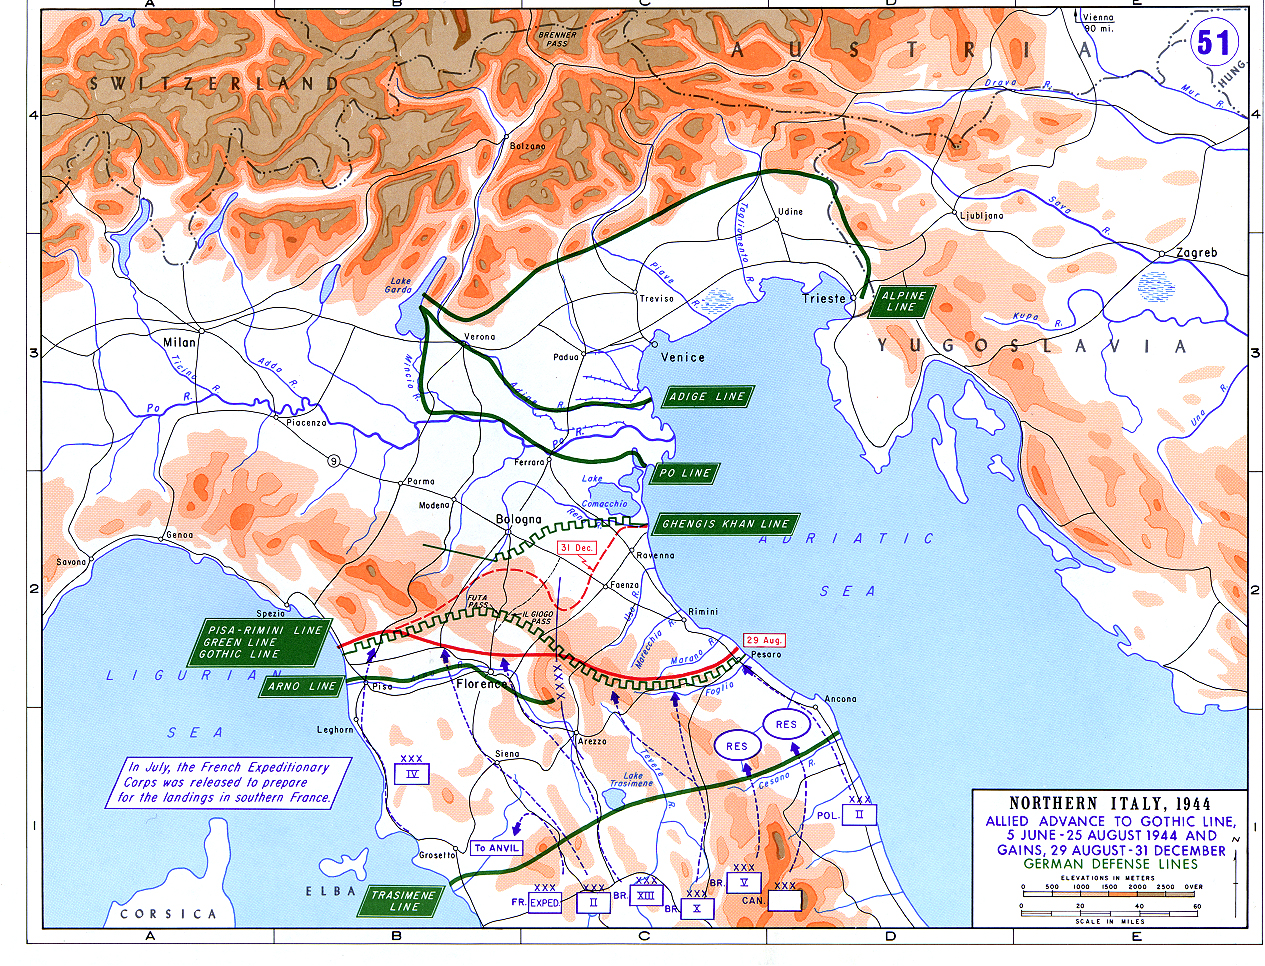 Map showing the Allied advance toward and through the Gothic Line, Italy, 5 Jun-31 Dec 1944